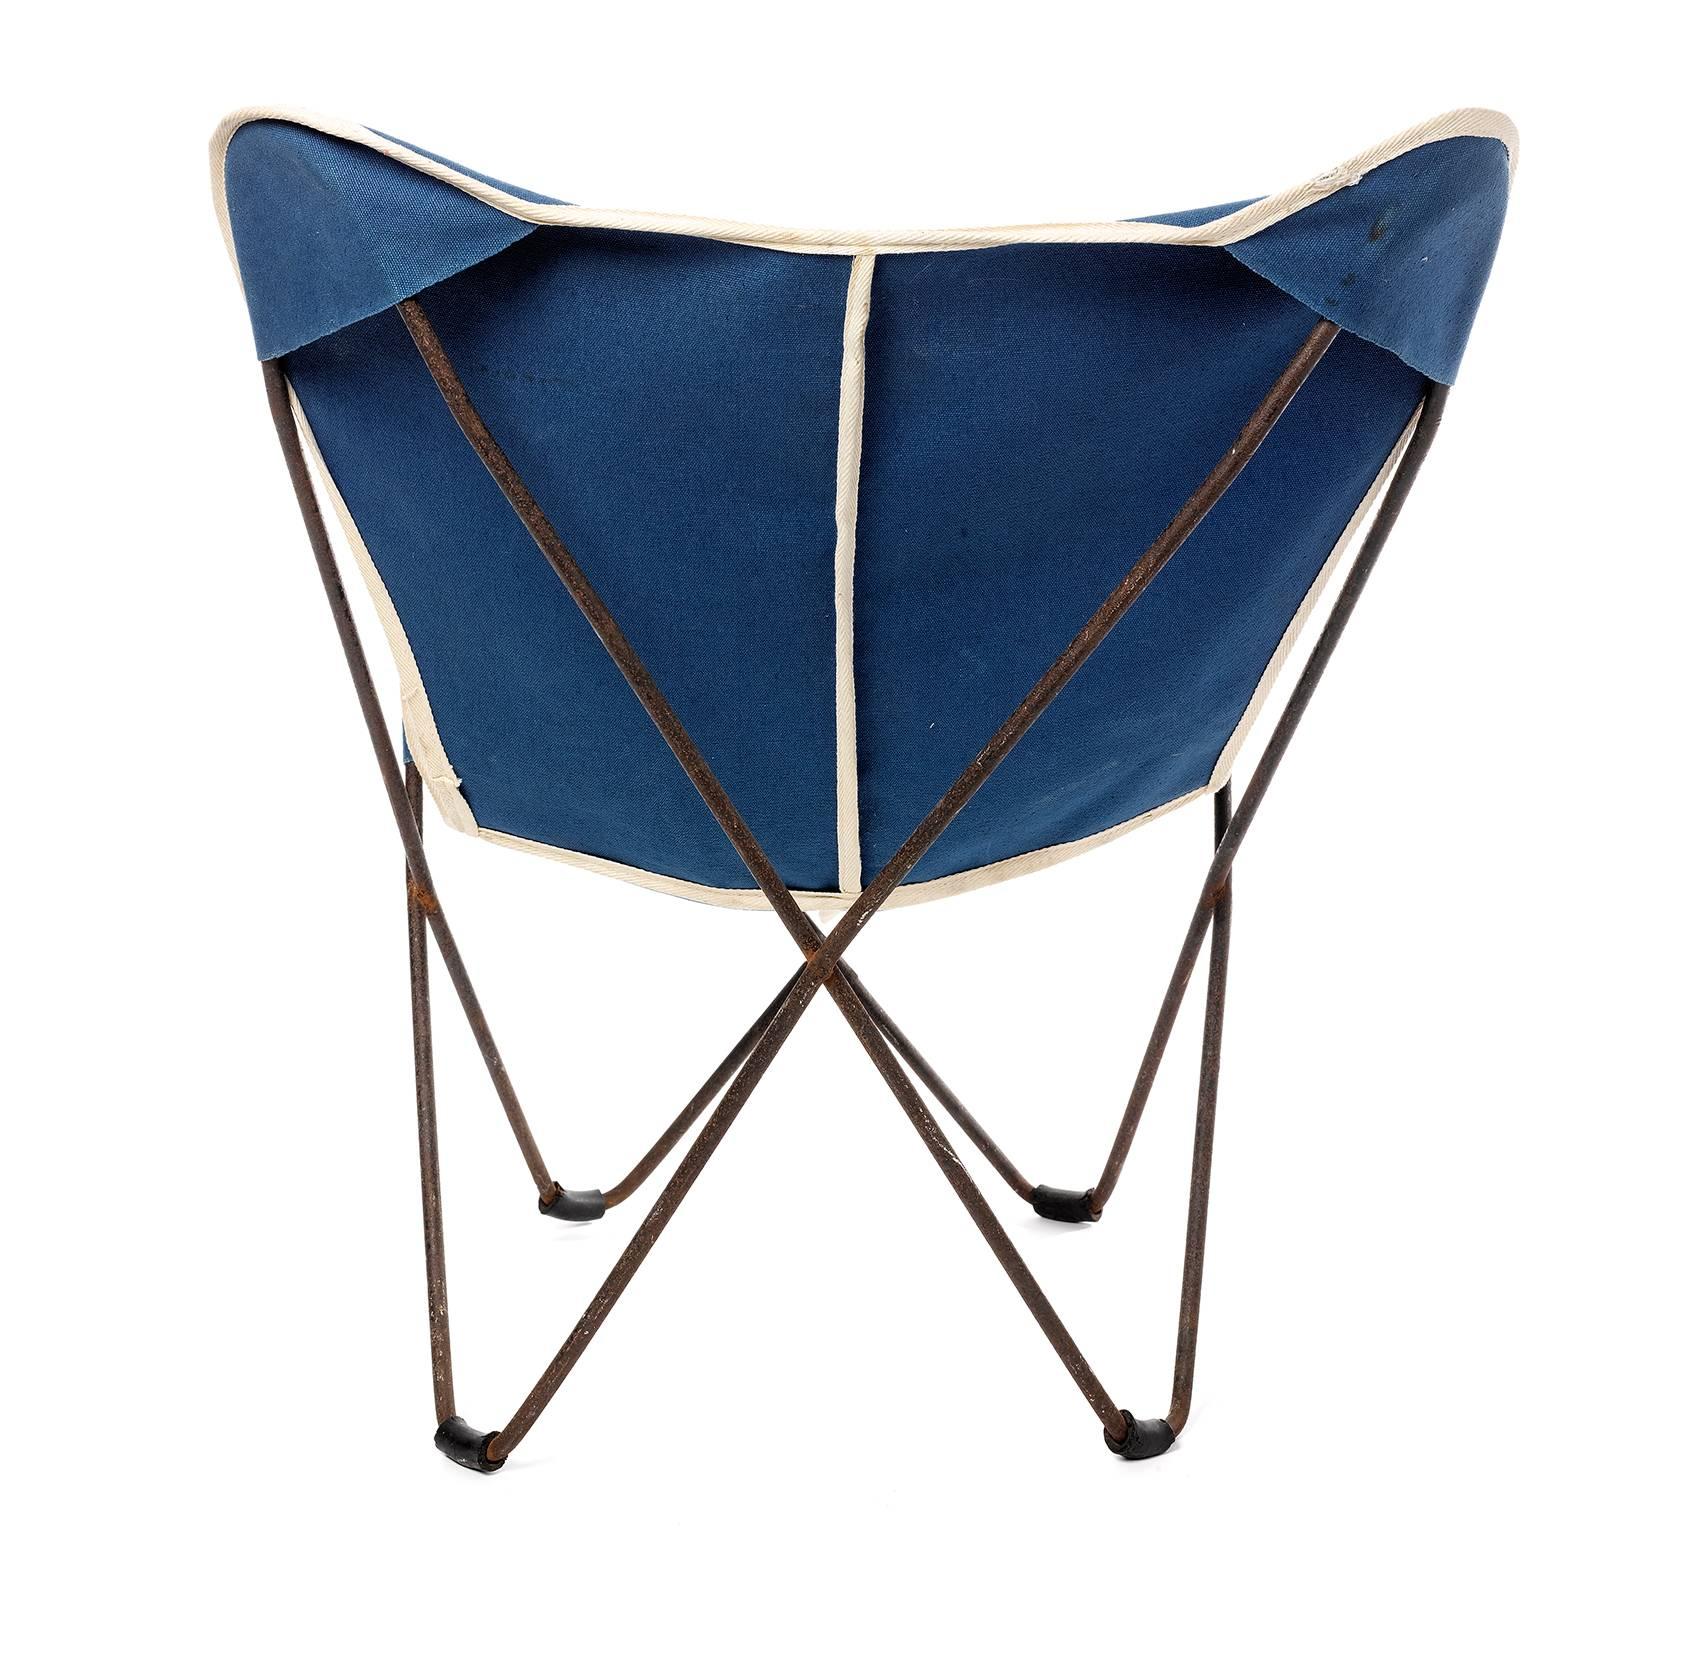 Child Butterfly Chair by Jorge Ferrari Hardoy in Blue Canvas, 1930s

Designed by Jorge Ferrari Hardoy, Antonio Bonet and Juan Kurchan
Vintage, 1930s
Iron frame, original blue canvas cover
H 25 in, W 17 in, D 21.25 in (seat: H 10.5 in)